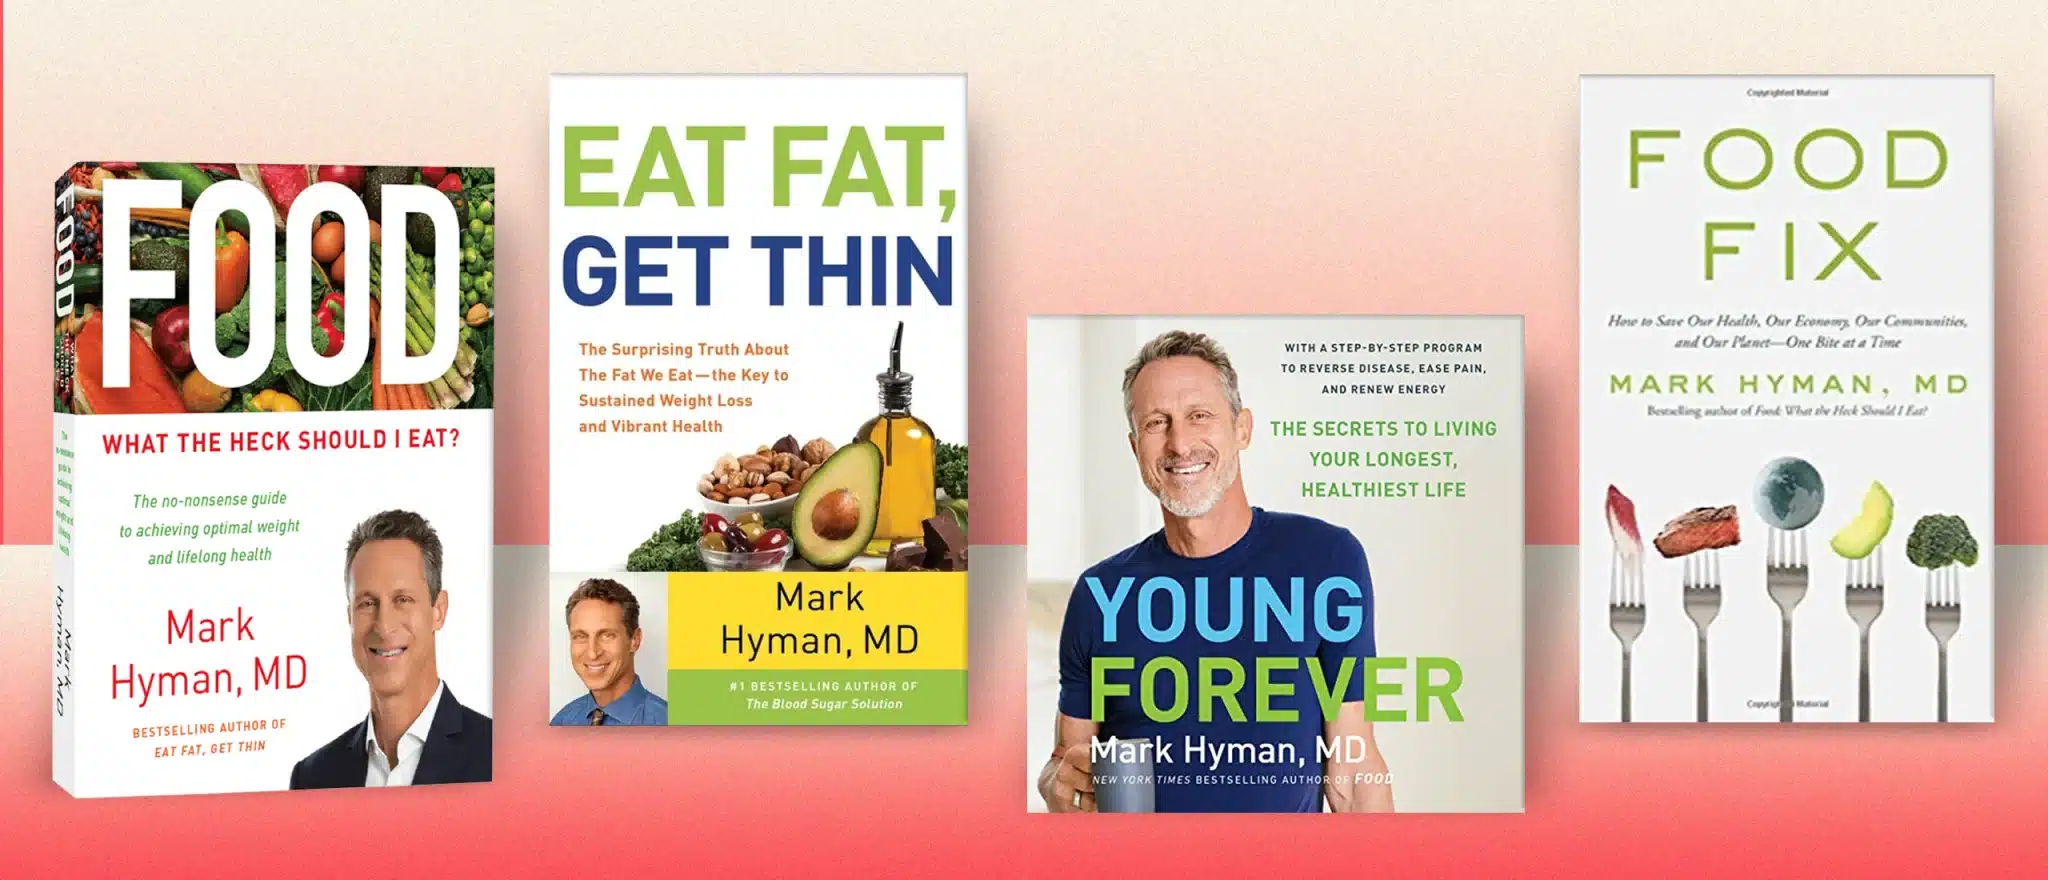 Want to Level Up Your Nutrition Knowledge? Start With These 9 Mark Hyman Books